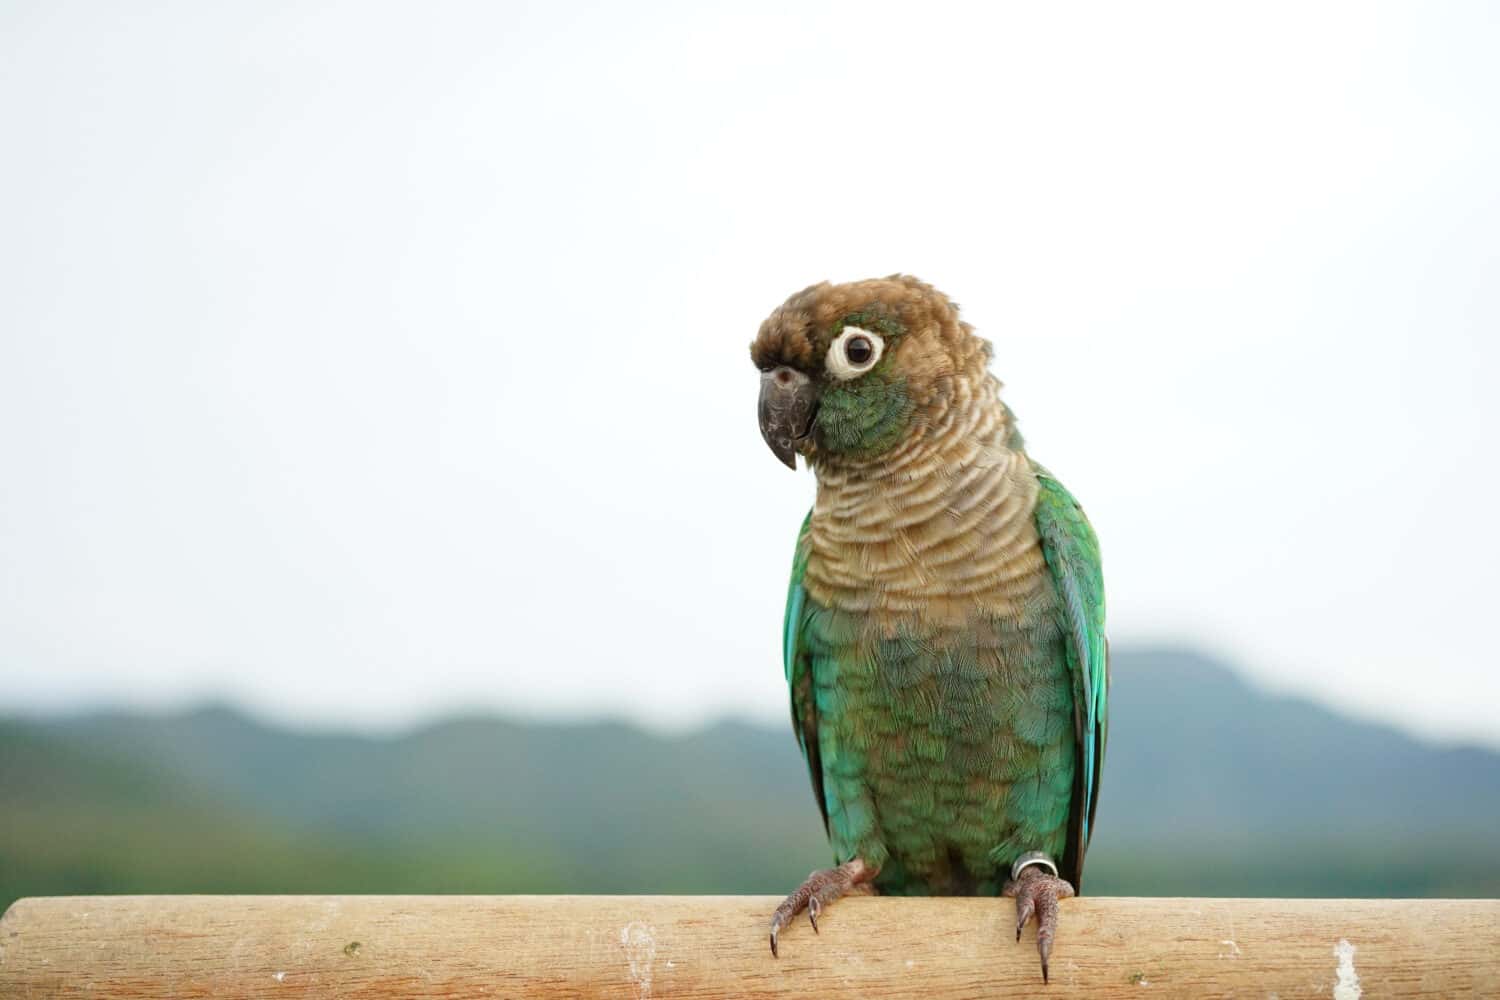 Green cheek conure on the sky and mountain background, the small parrot of the genus Pyrrhura, has a sharp beak. Native to South America (Amazon).